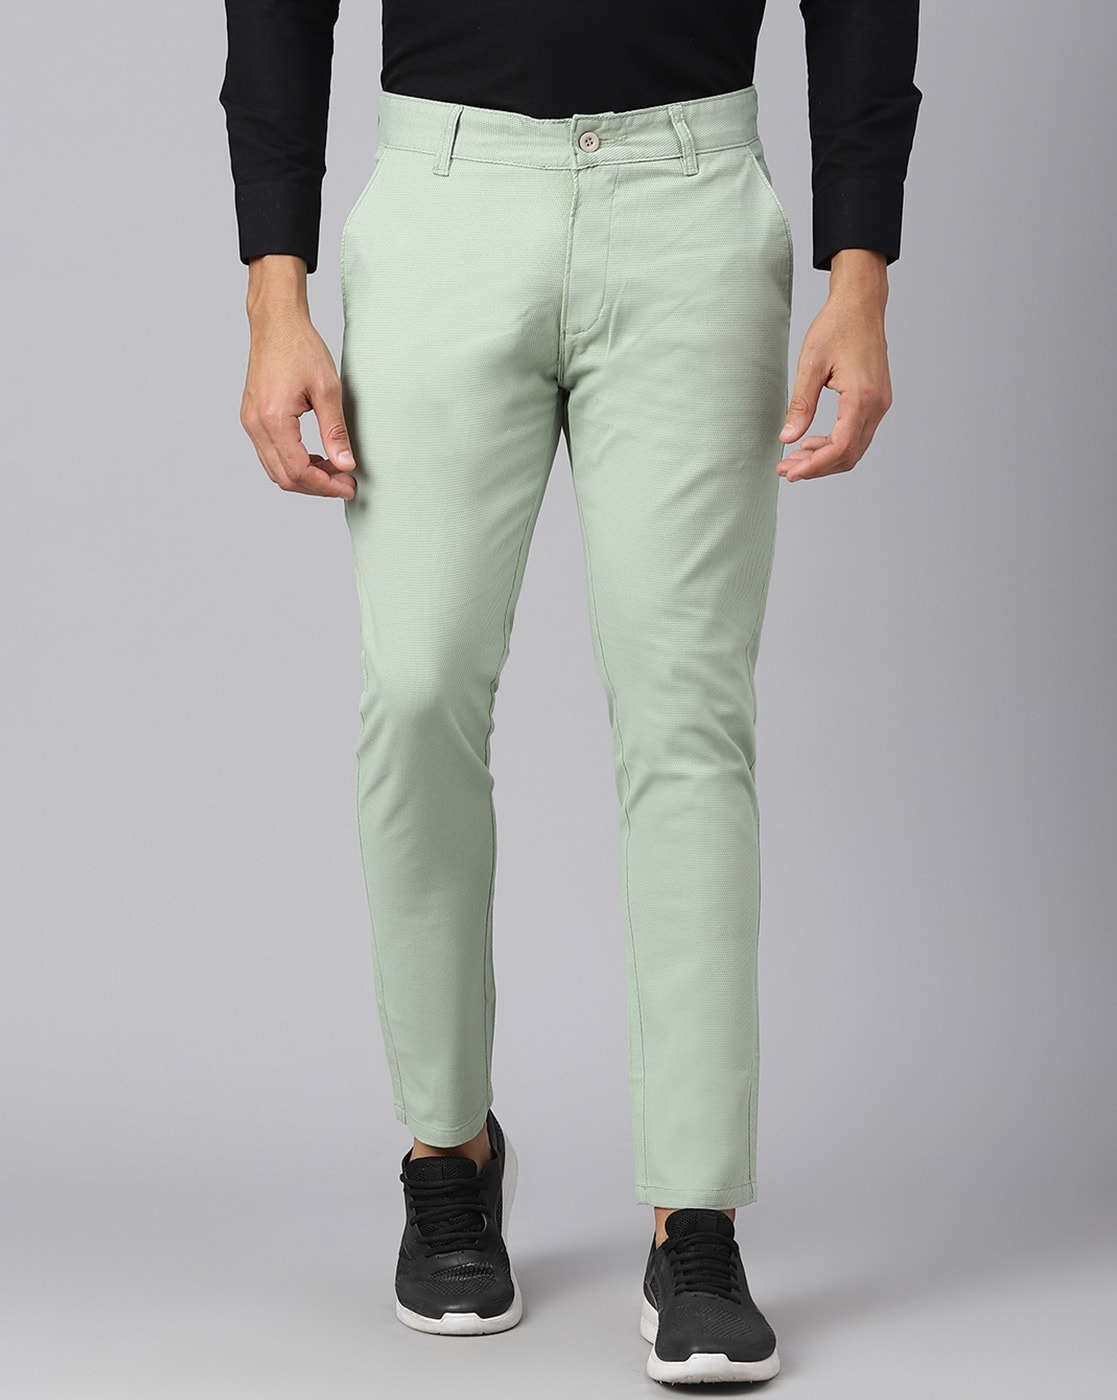 How to Wear Colorful Trousers for Men